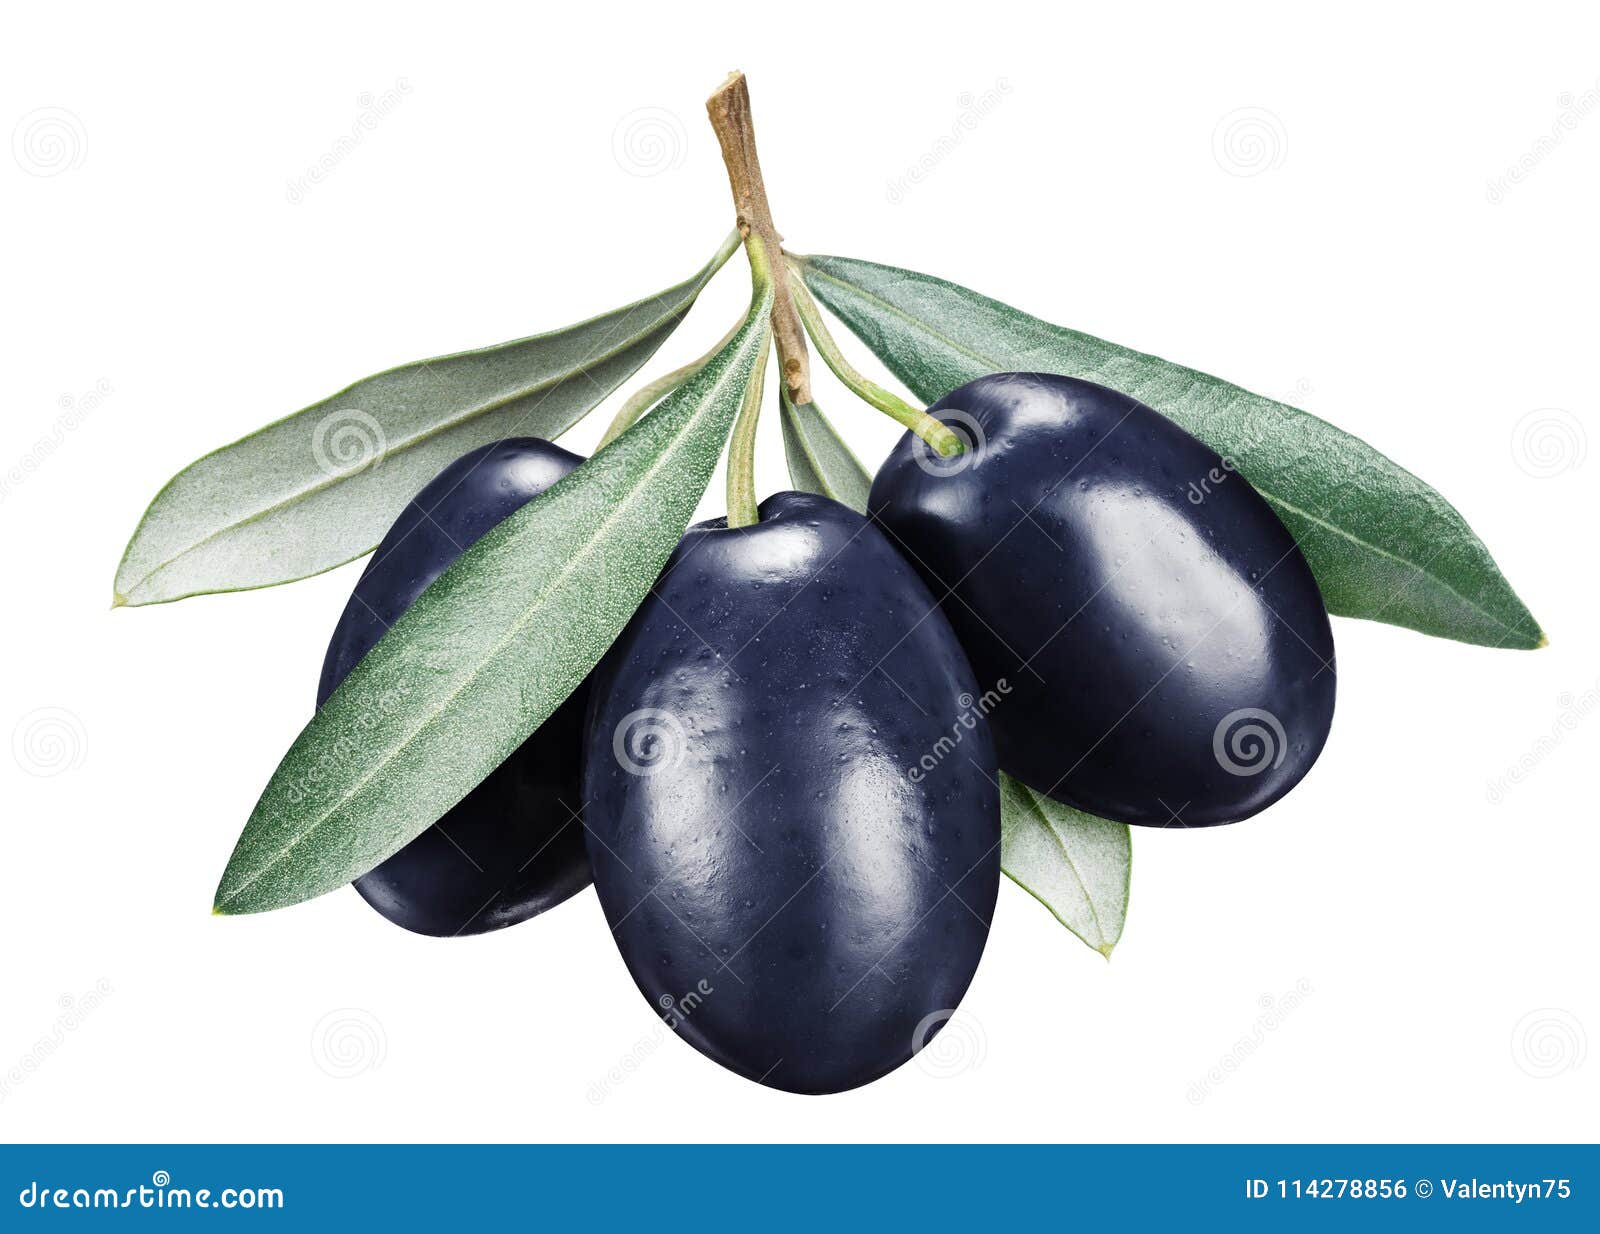 Three Black Ripe Olive Berries with Leaves. Stock Photo - Image of healthy,  harvest: 114278856